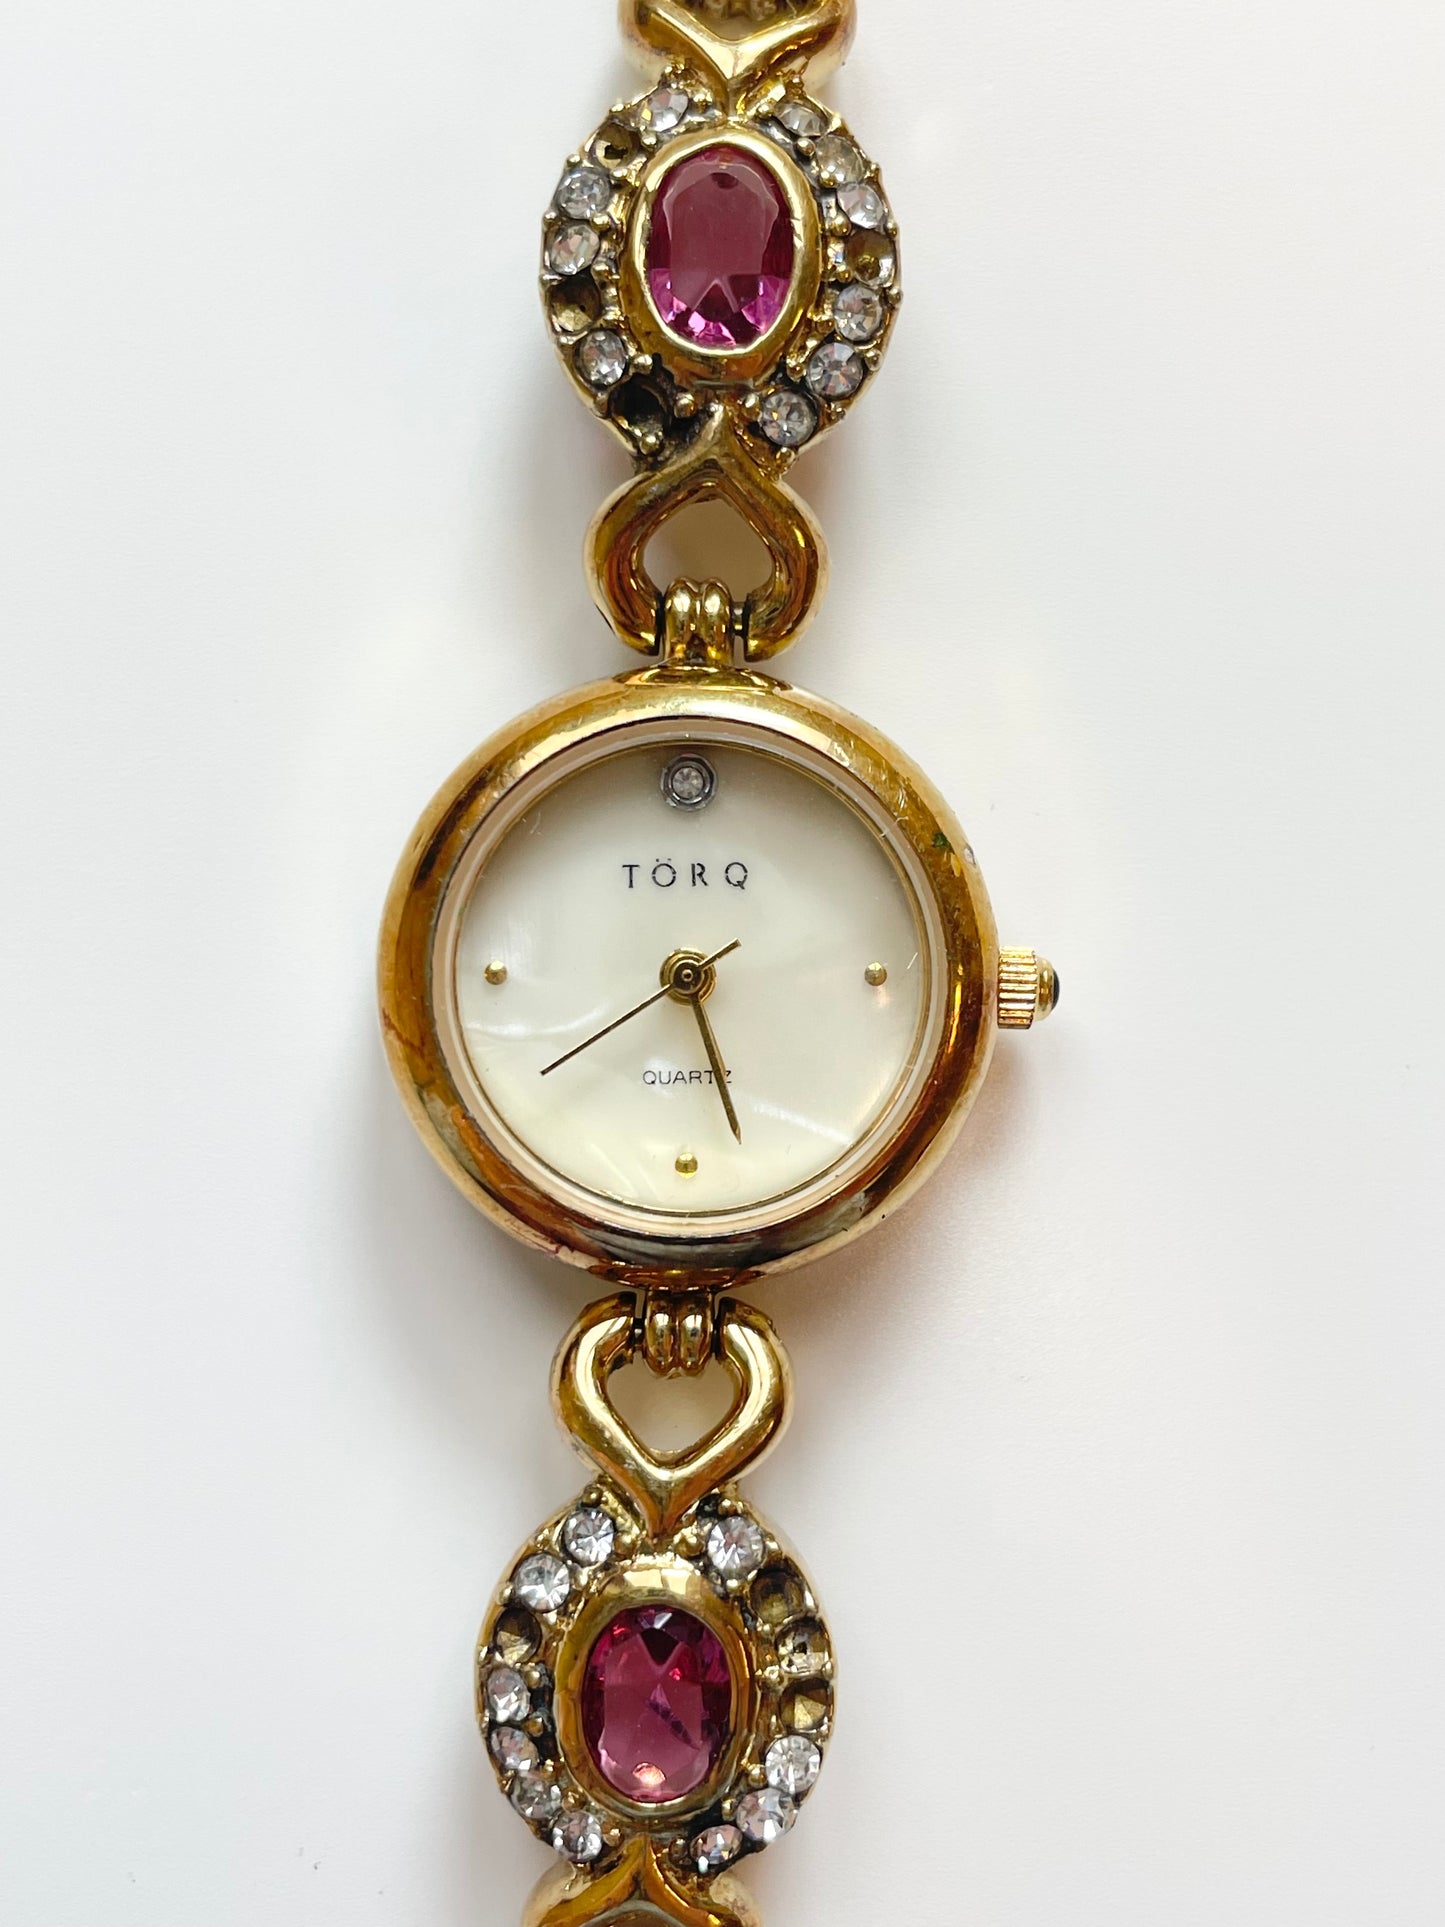 The Ruby Watch